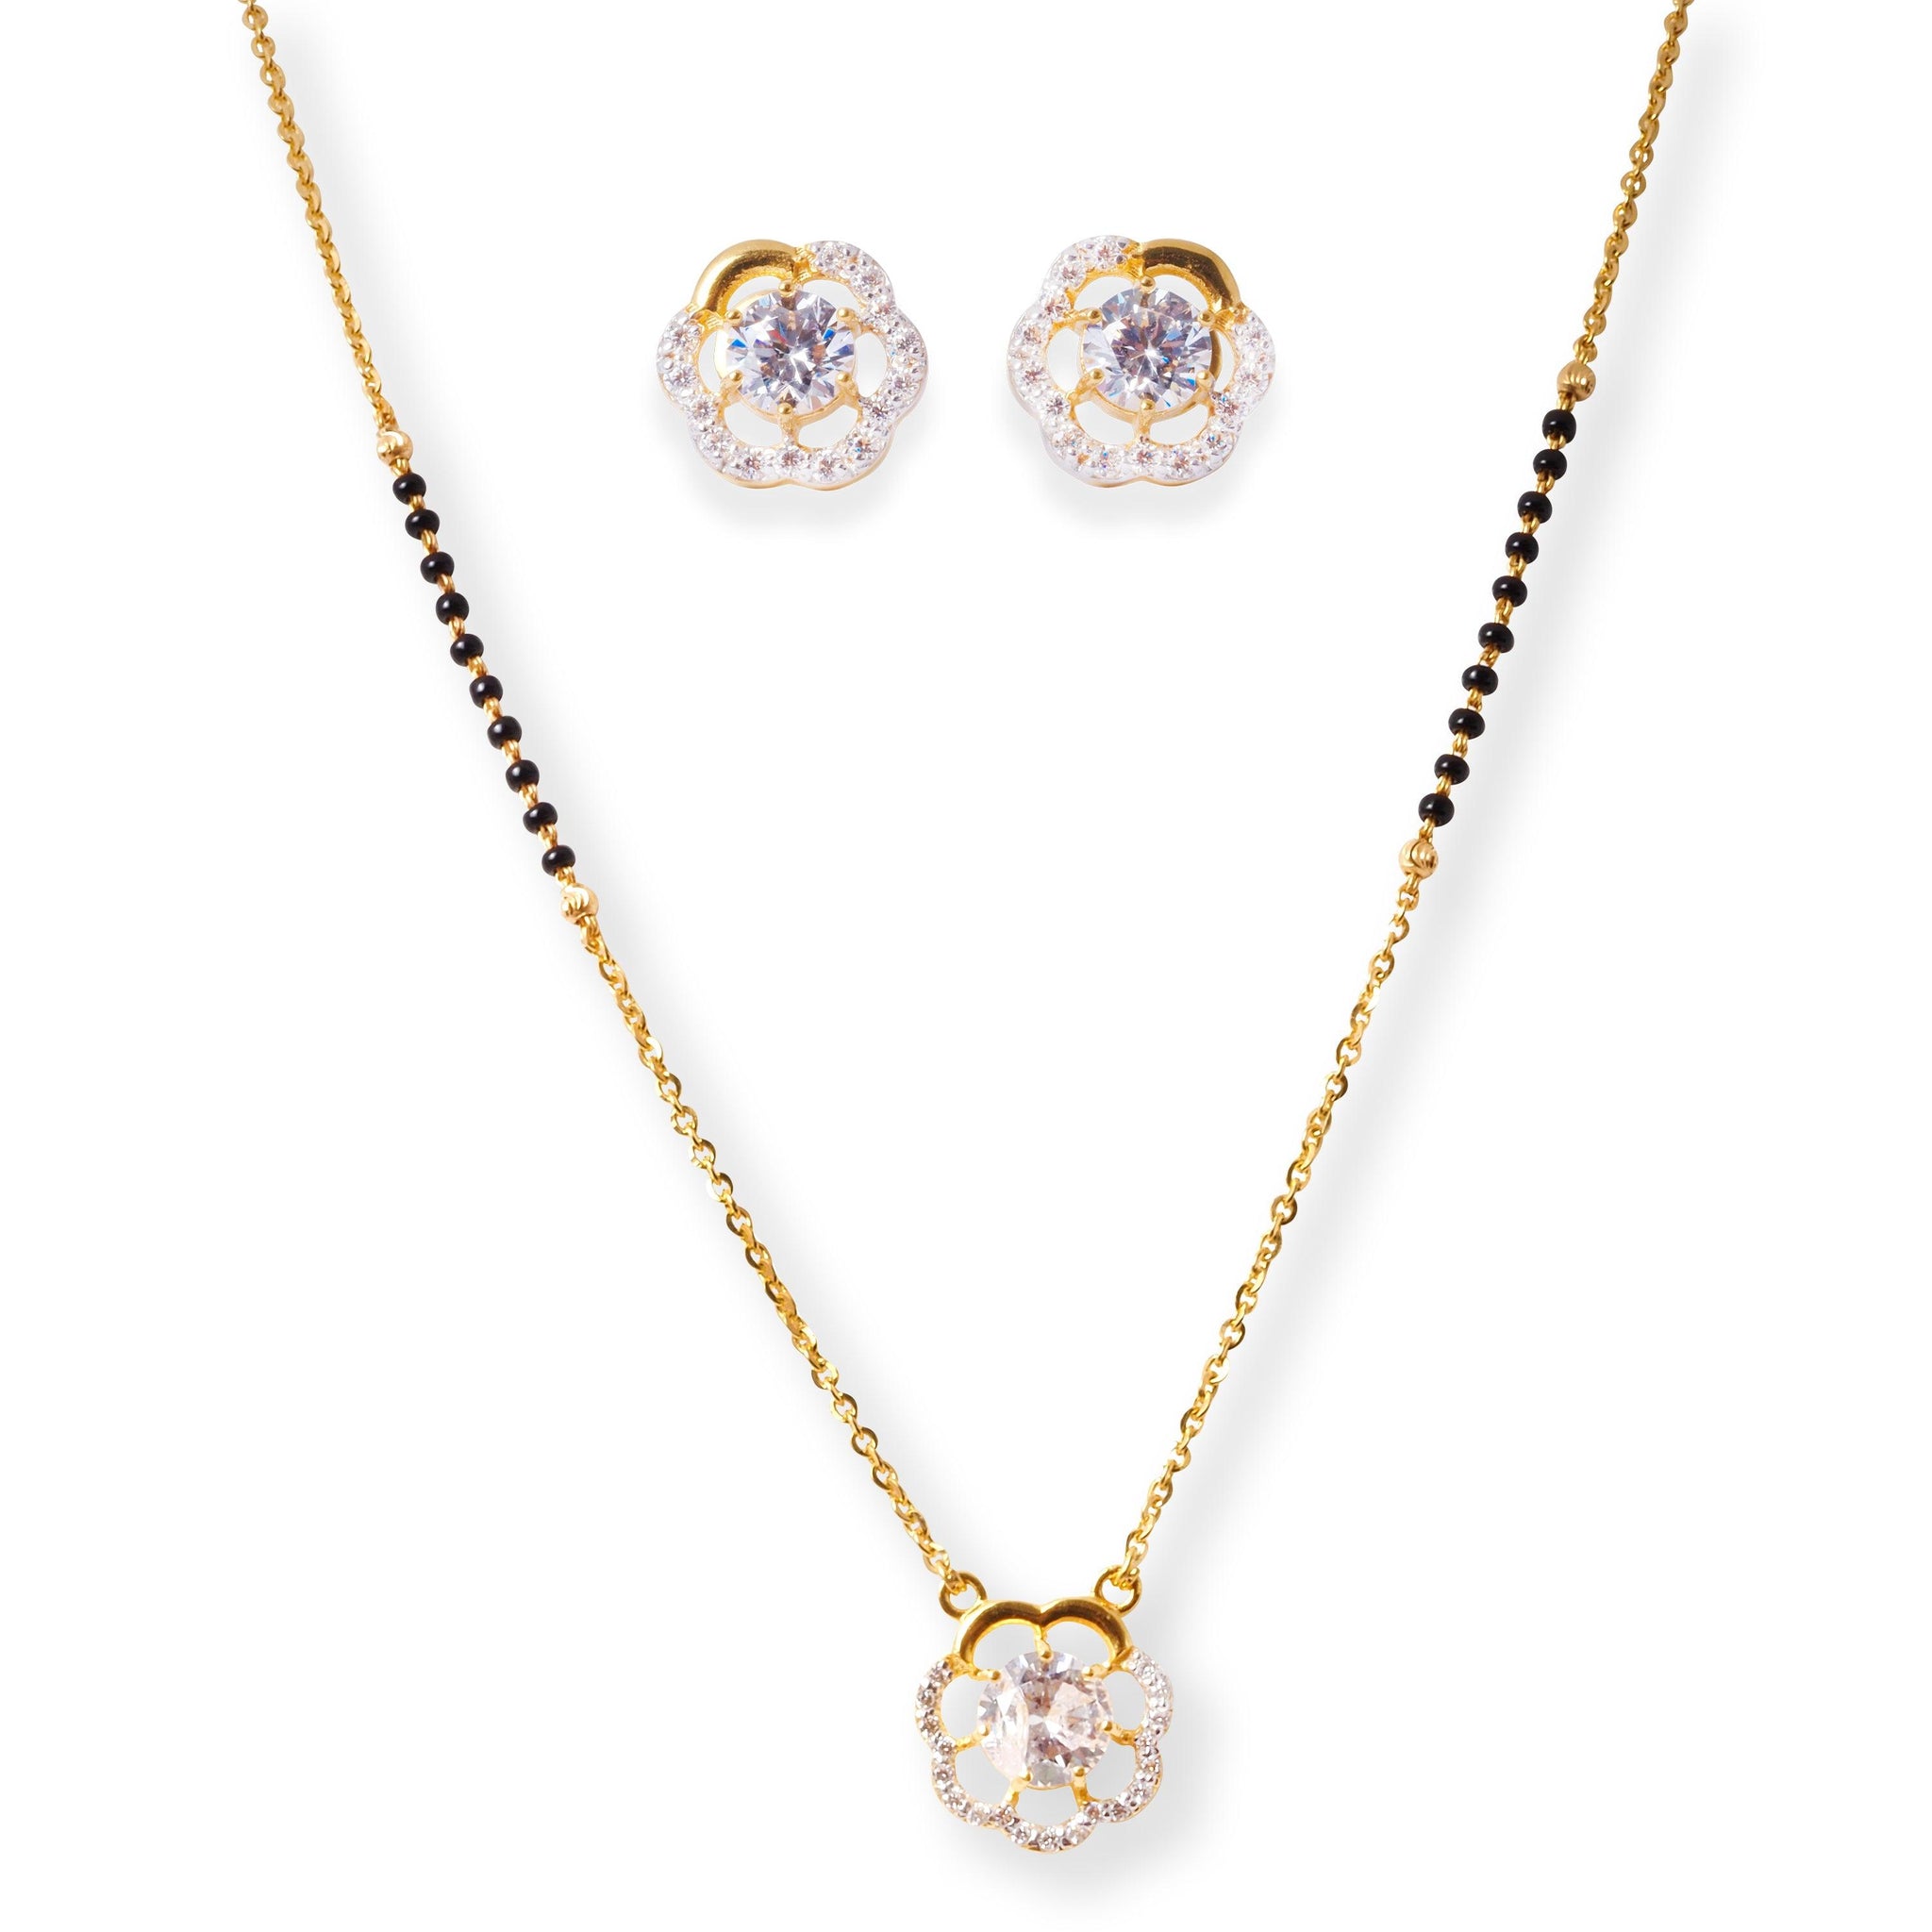 22ct Gold Flower Design Set with Black Beads, Cubic Zirconia Stones & Lobster Clasp N-7930